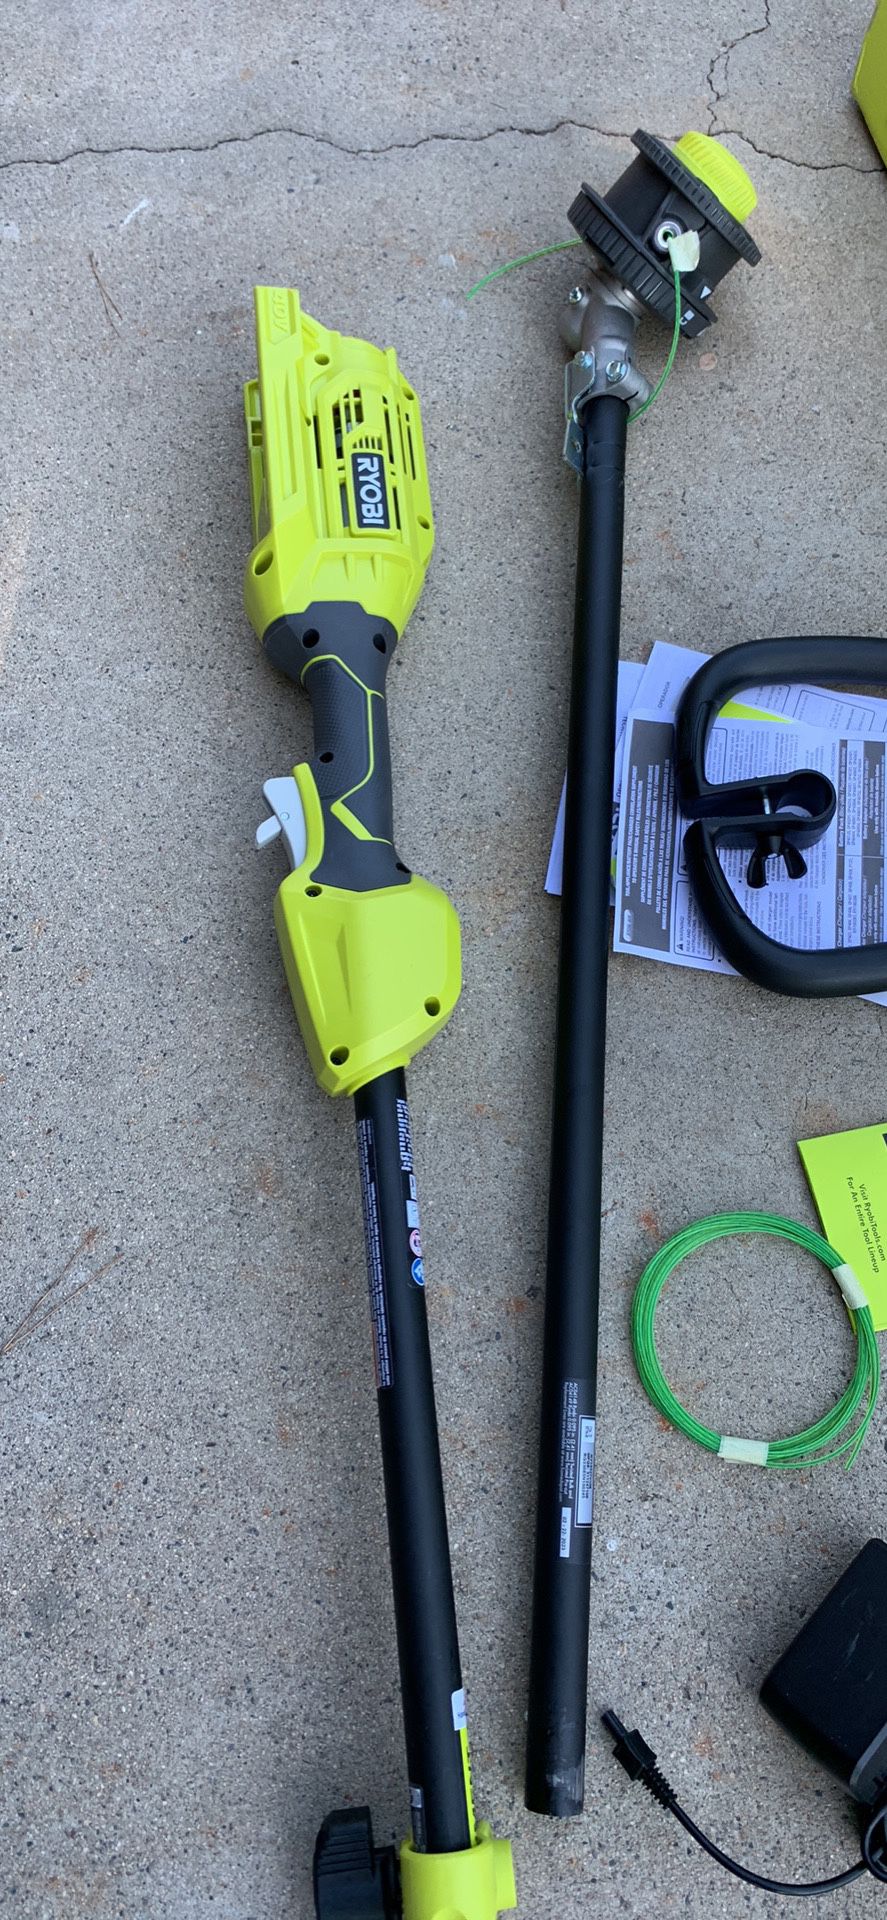  RYOBI 40-Volt Lithium-Ion Cordless Attachment Capable String  Trimmer, 4.0 Ah Battery and Charger Inc : Patio, Lawn & Garden